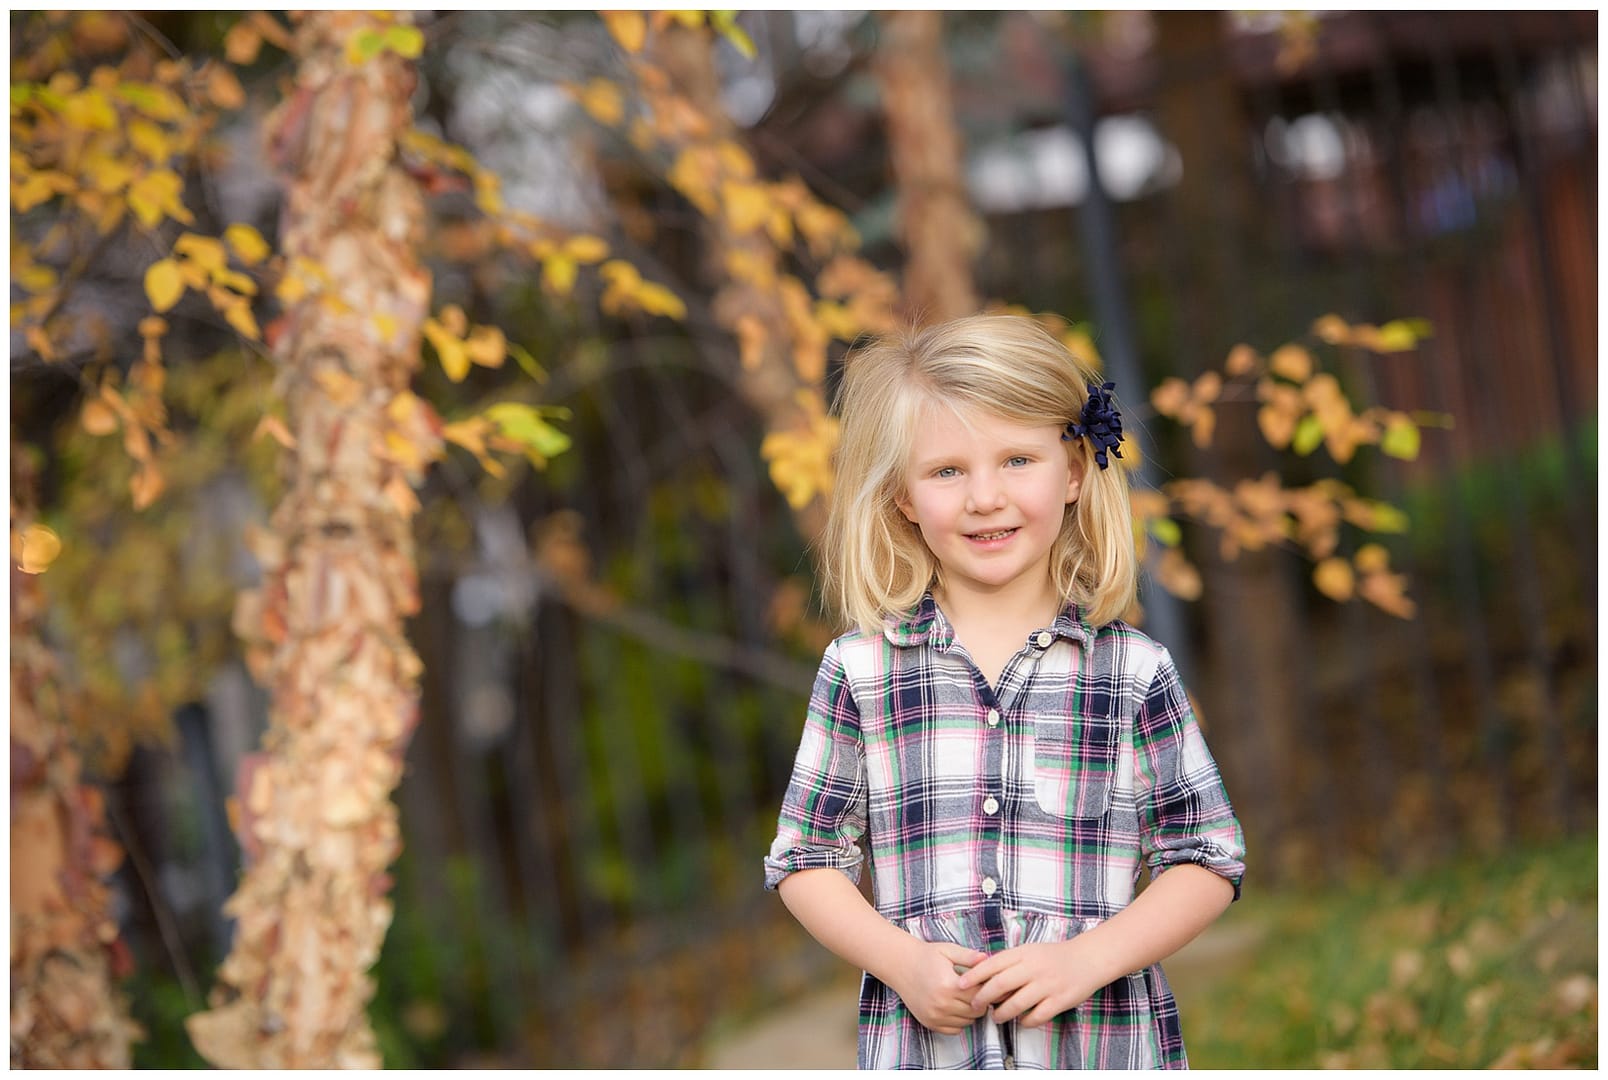 Blonde girl in plaid shirt. Photo by Tiffany Hix Photography